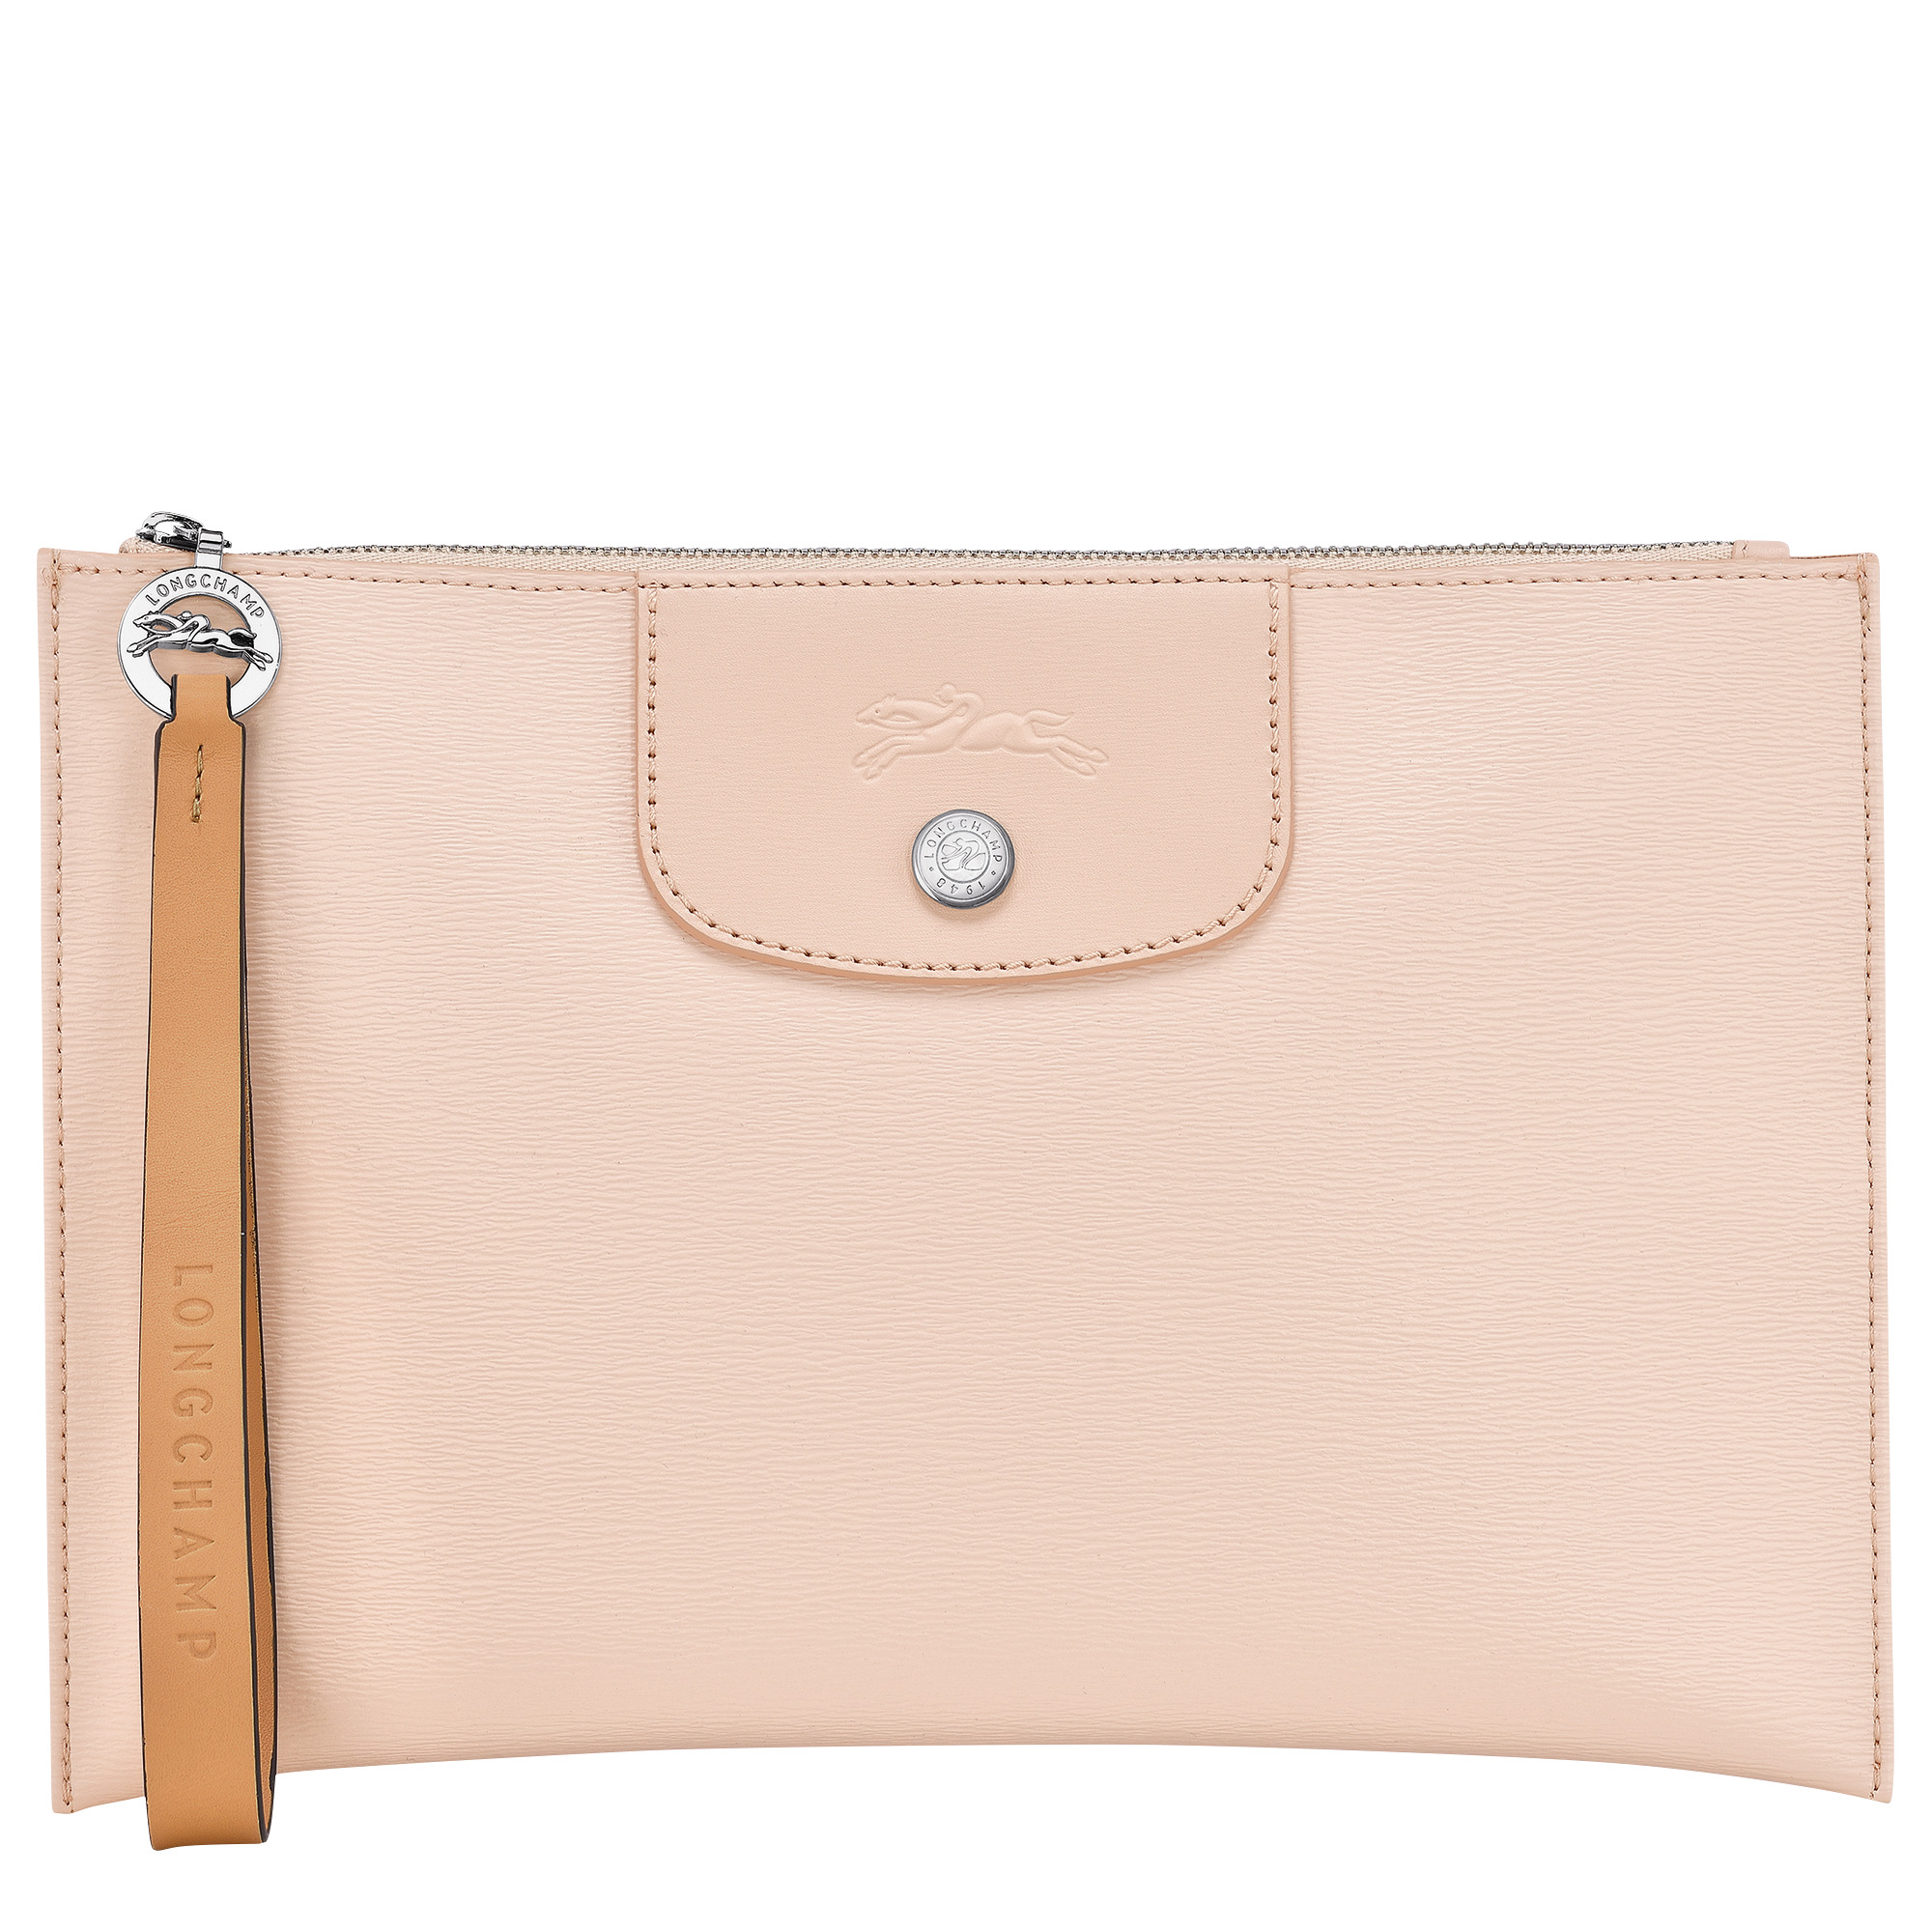 Le Pliage Original Pouch with handle Paper - Recycled canvas